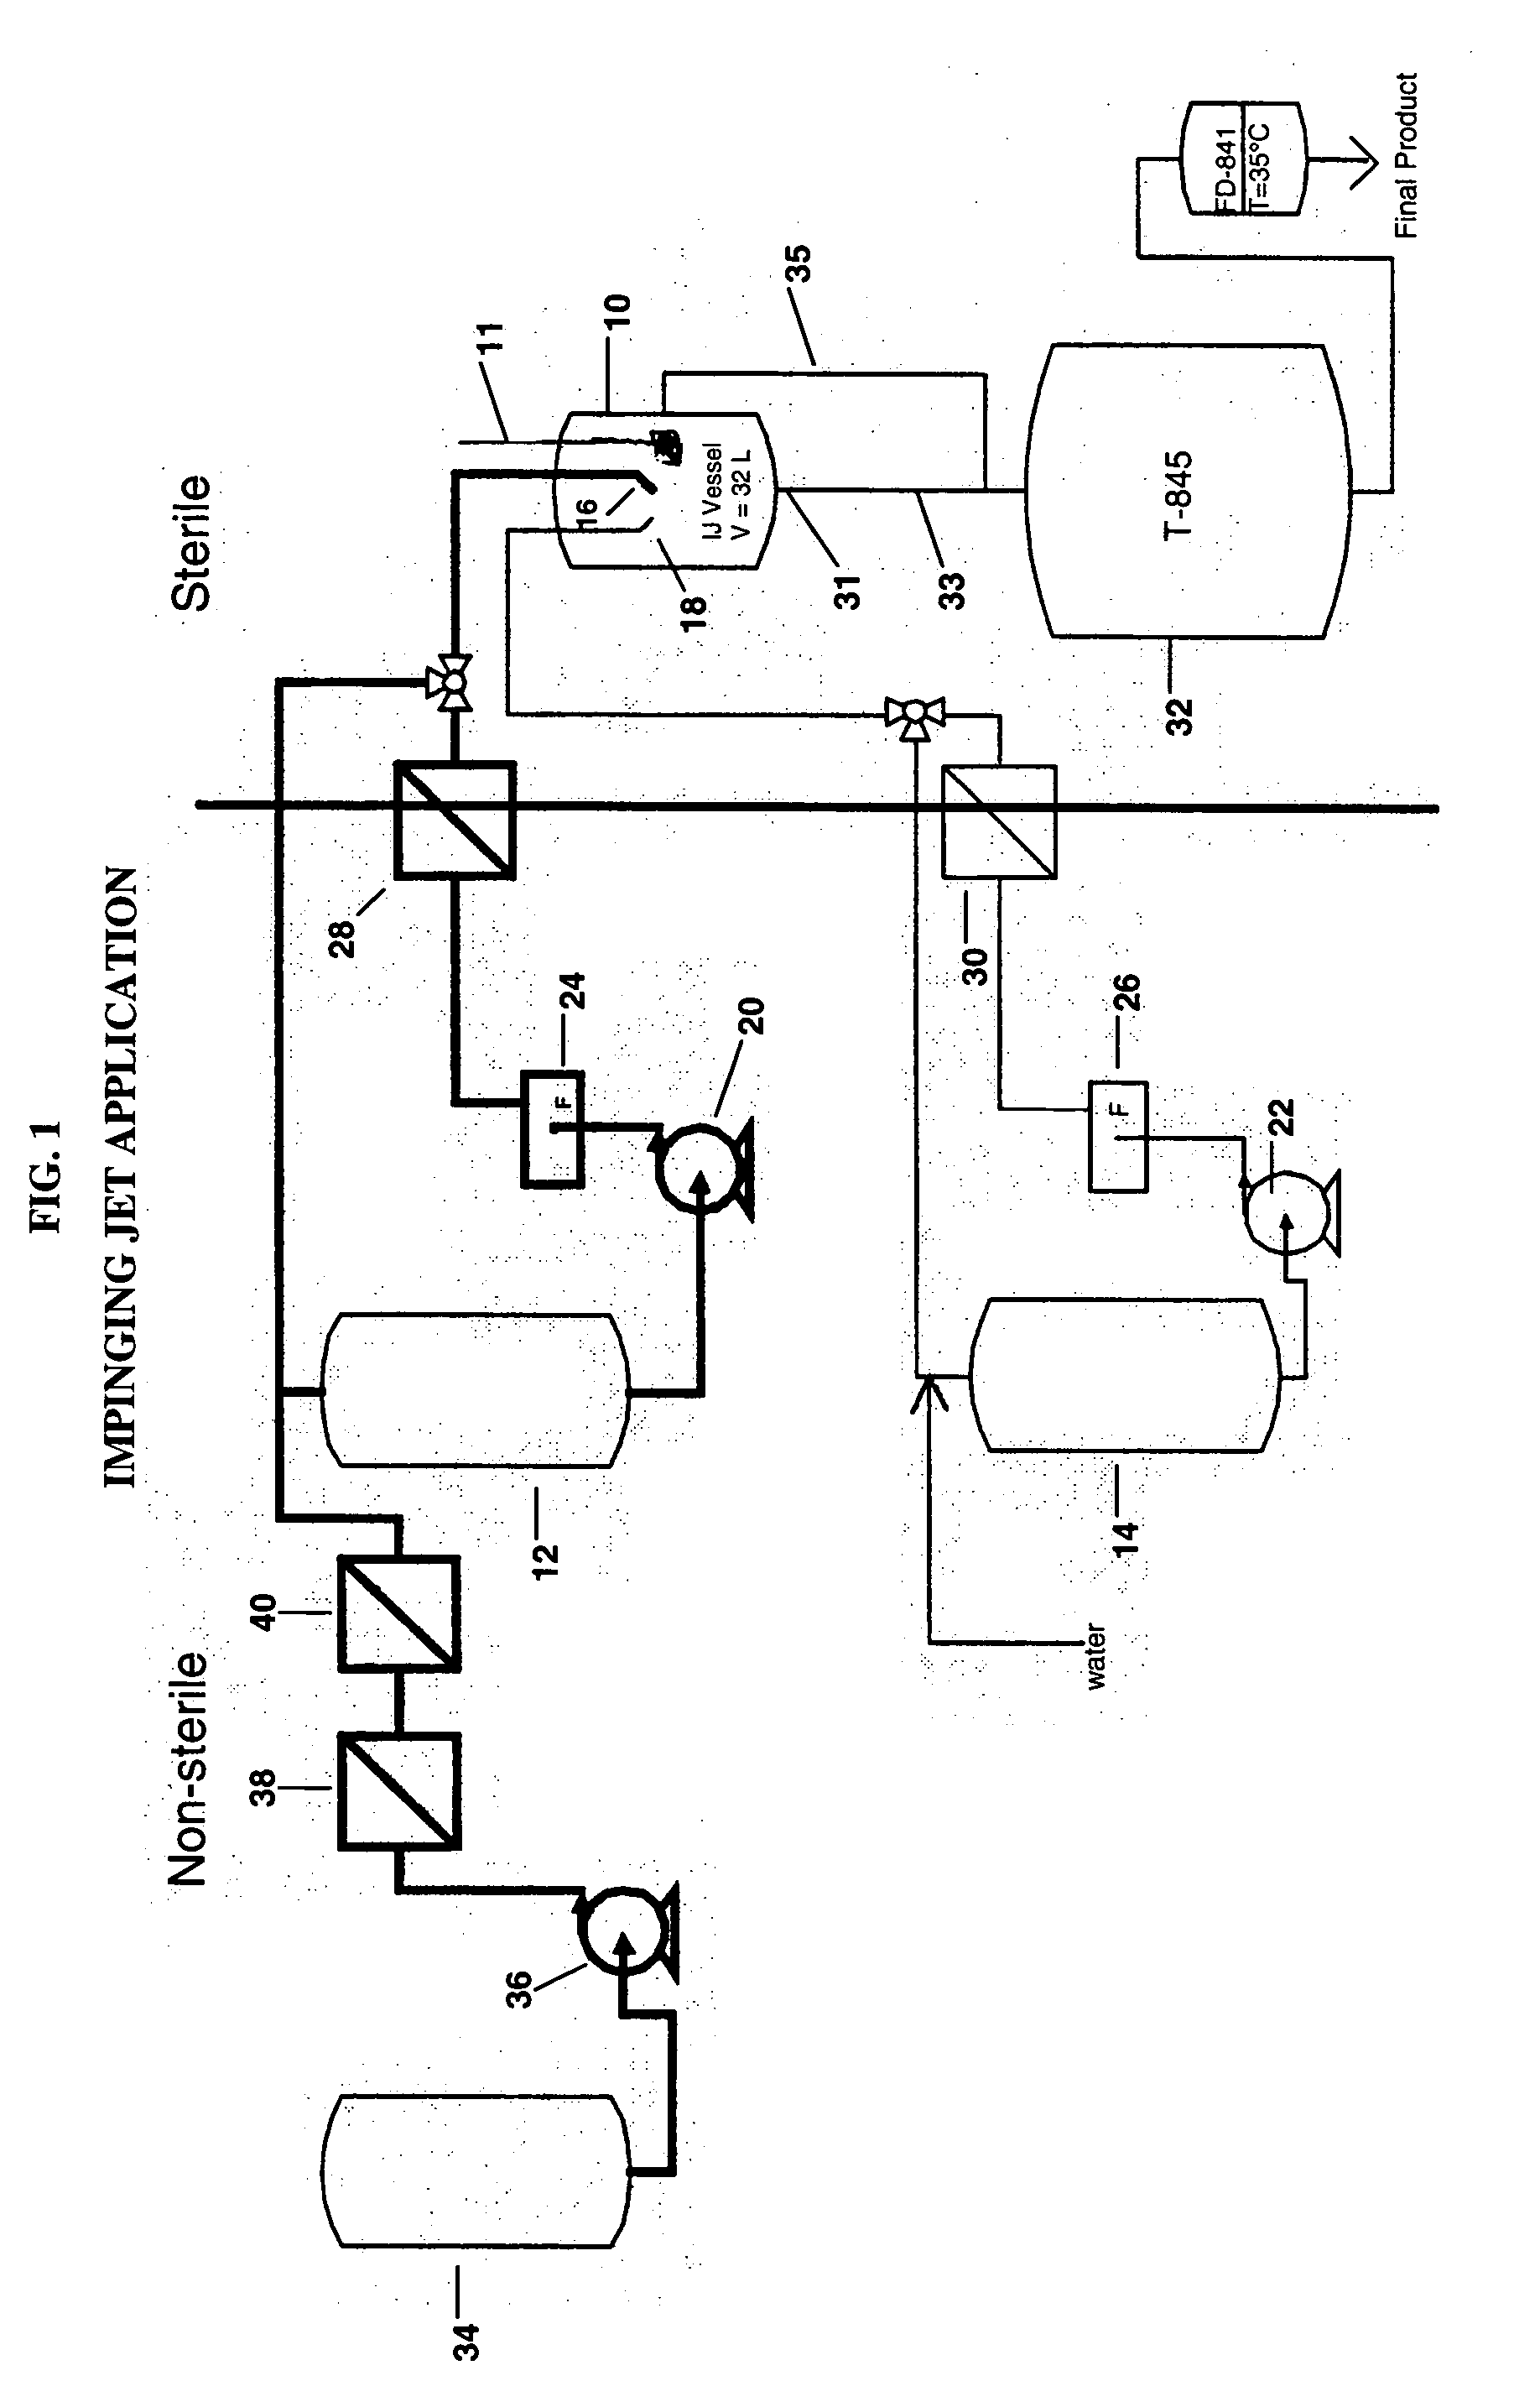 Process for making sterile aripiprazole of desired mean particle size